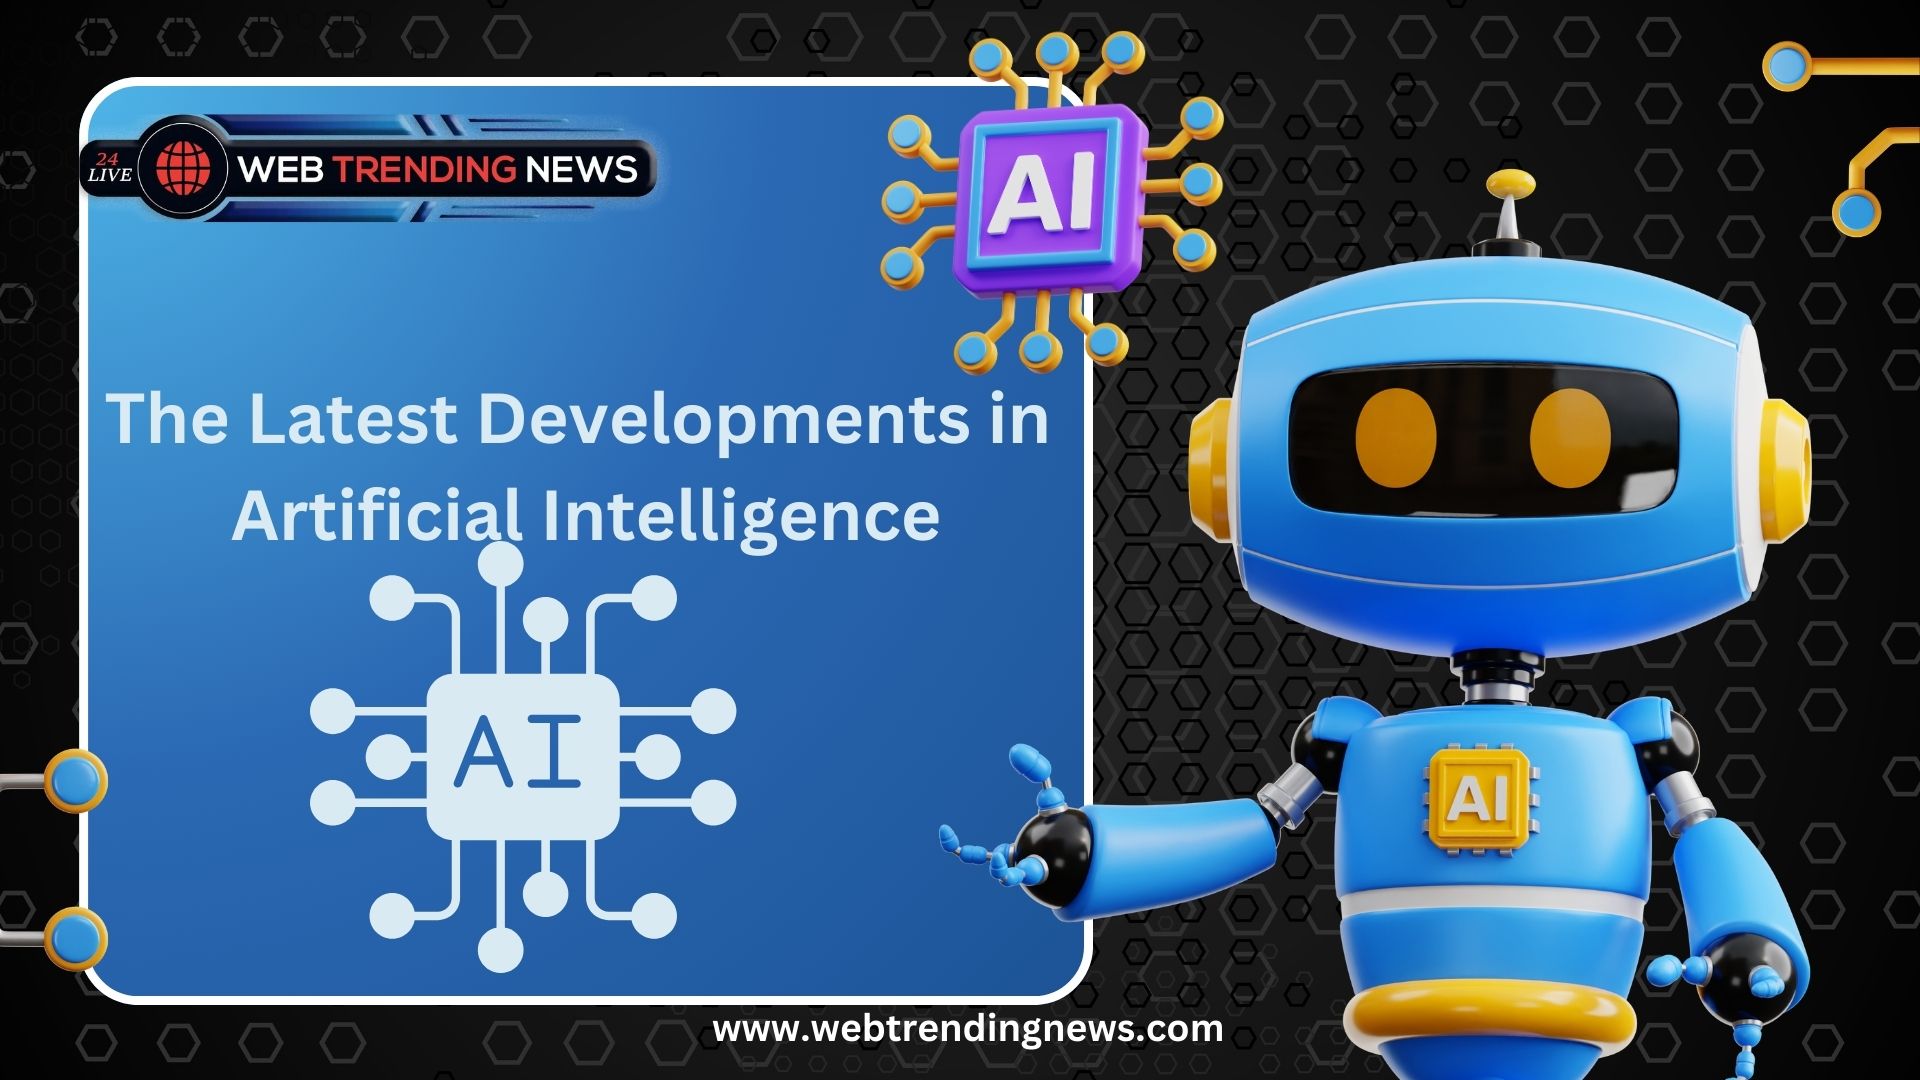 The Latest Developments in Artificial Intelligence